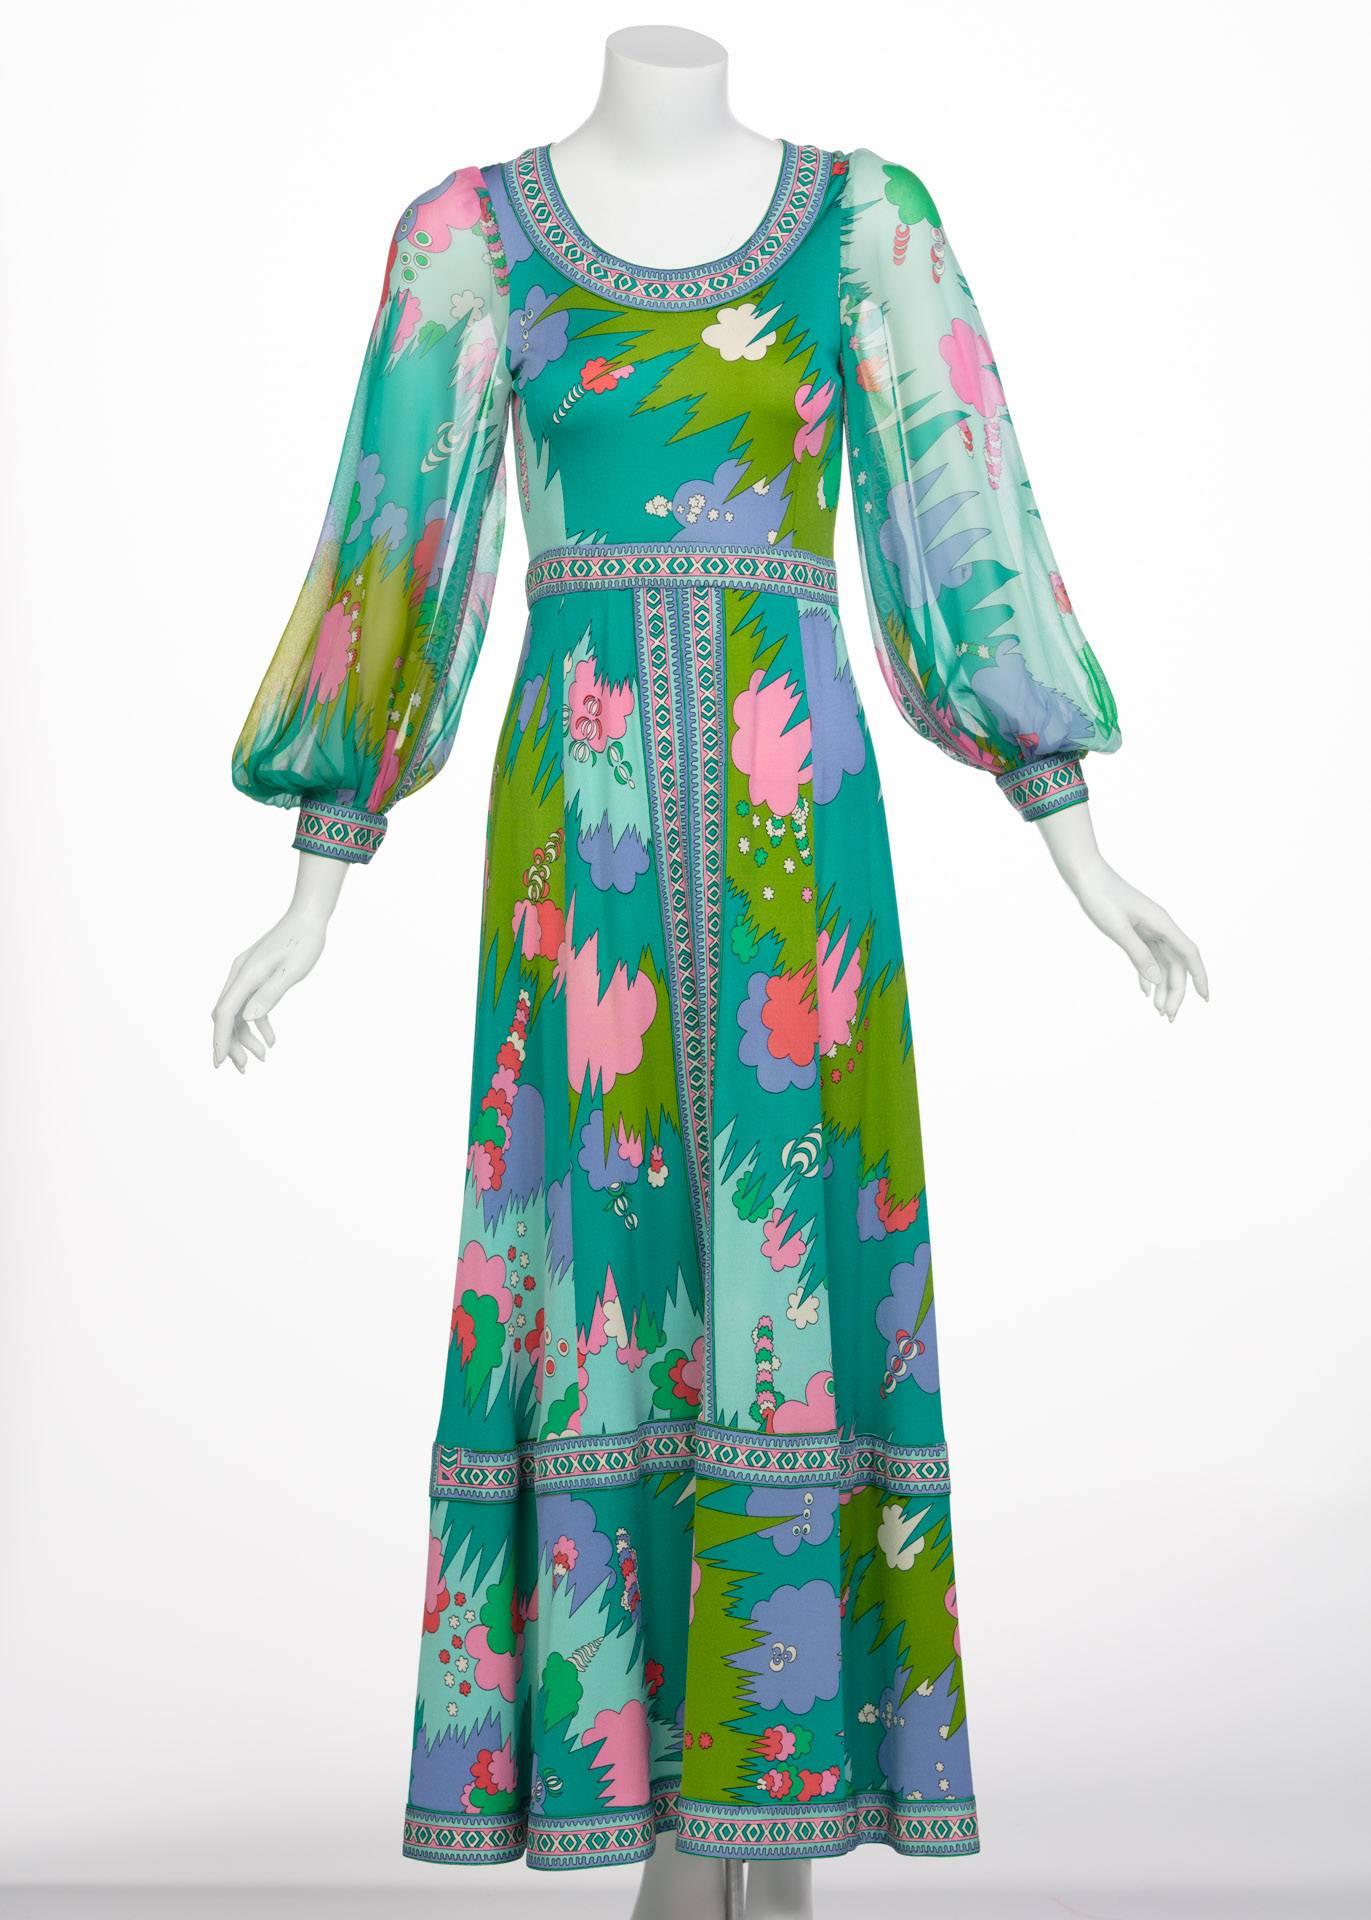 Bessi Multicolored Silk Jersey Chiffon Sleeves Maxi dress, 1970s  For Sale 1